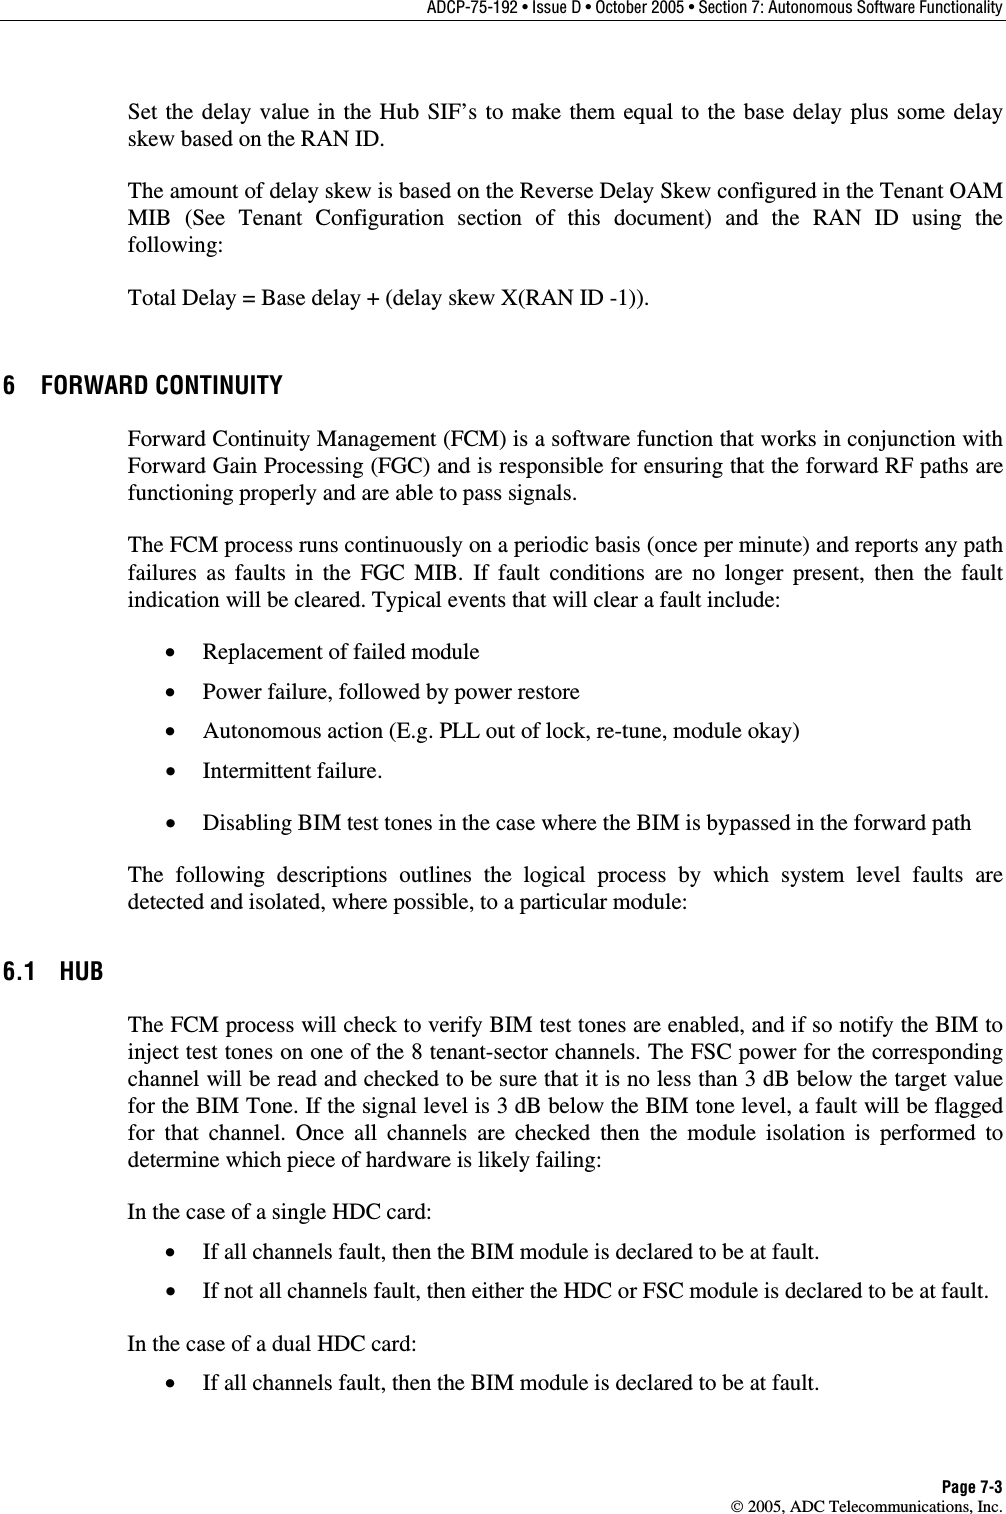 ADCP-75-192 • Issue D • October 2005 • Section 7: Autonomous Software Functionality Page 7-3  2005, ADC Telecommunications, Inc. Set the delay value in the Hub SIF’s to make them equal to the base delay plus some delay skew based on the RAN ID. The amount of delay skew is based on the Reverse Delay Skew configured in the Tenant OAM MIB (See Tenant Configuration section of this document) and the RAN ID using the following: Total Delay = Base delay + (delay skew X(RAN ID -1)). 6 FORWARD CONTINUITY Forward Continuity Management (FCM) is a software function that works in conjunction with Forward Gain Processing (FGC) and is responsible for ensuring that the forward RF paths are functioning properly and are able to pass signals.  The FCM process runs continuously on a periodic basis (once per minute) and reports any path failures as faults in the FGC MIB. If fault conditions are no longer present, then the fault indication will be cleared. Typical events that will clear a fault include: •  Replacement of failed module •  Power failure, followed by power restore •  Autonomous action (E.g. PLL out of lock, re-tune, module okay) •  Intermittent failure. •  Disabling BIM test tones in the case where the BIM is bypassed in the forward path The following descriptions outlines the logical process by which system level faults are detected and isolated, where possible, to a particular module: 6.1 HUB The FCM process will check to verify BIM test tones are enabled, and if so notify the BIM to inject test tones on one of the 8 tenant-sector channels. The FSC power for the corresponding channel will be read and checked to be sure that it is no less than 3 dB below the target value for the BIM Tone. If the signal level is 3 dB below the BIM tone level, a fault will be flagged for that channel. Once all channels are checked then the module isolation is performed to determine which piece of hardware is likely failing: In the case of a single HDC card: •  If all channels fault, then the BIM module is declared to be at fault. •  If not all channels fault, then either the HDC or FSC module is declared to be at fault.  In the case of a dual HDC card: •  If all channels fault, then the BIM module is declared to be at fault. 